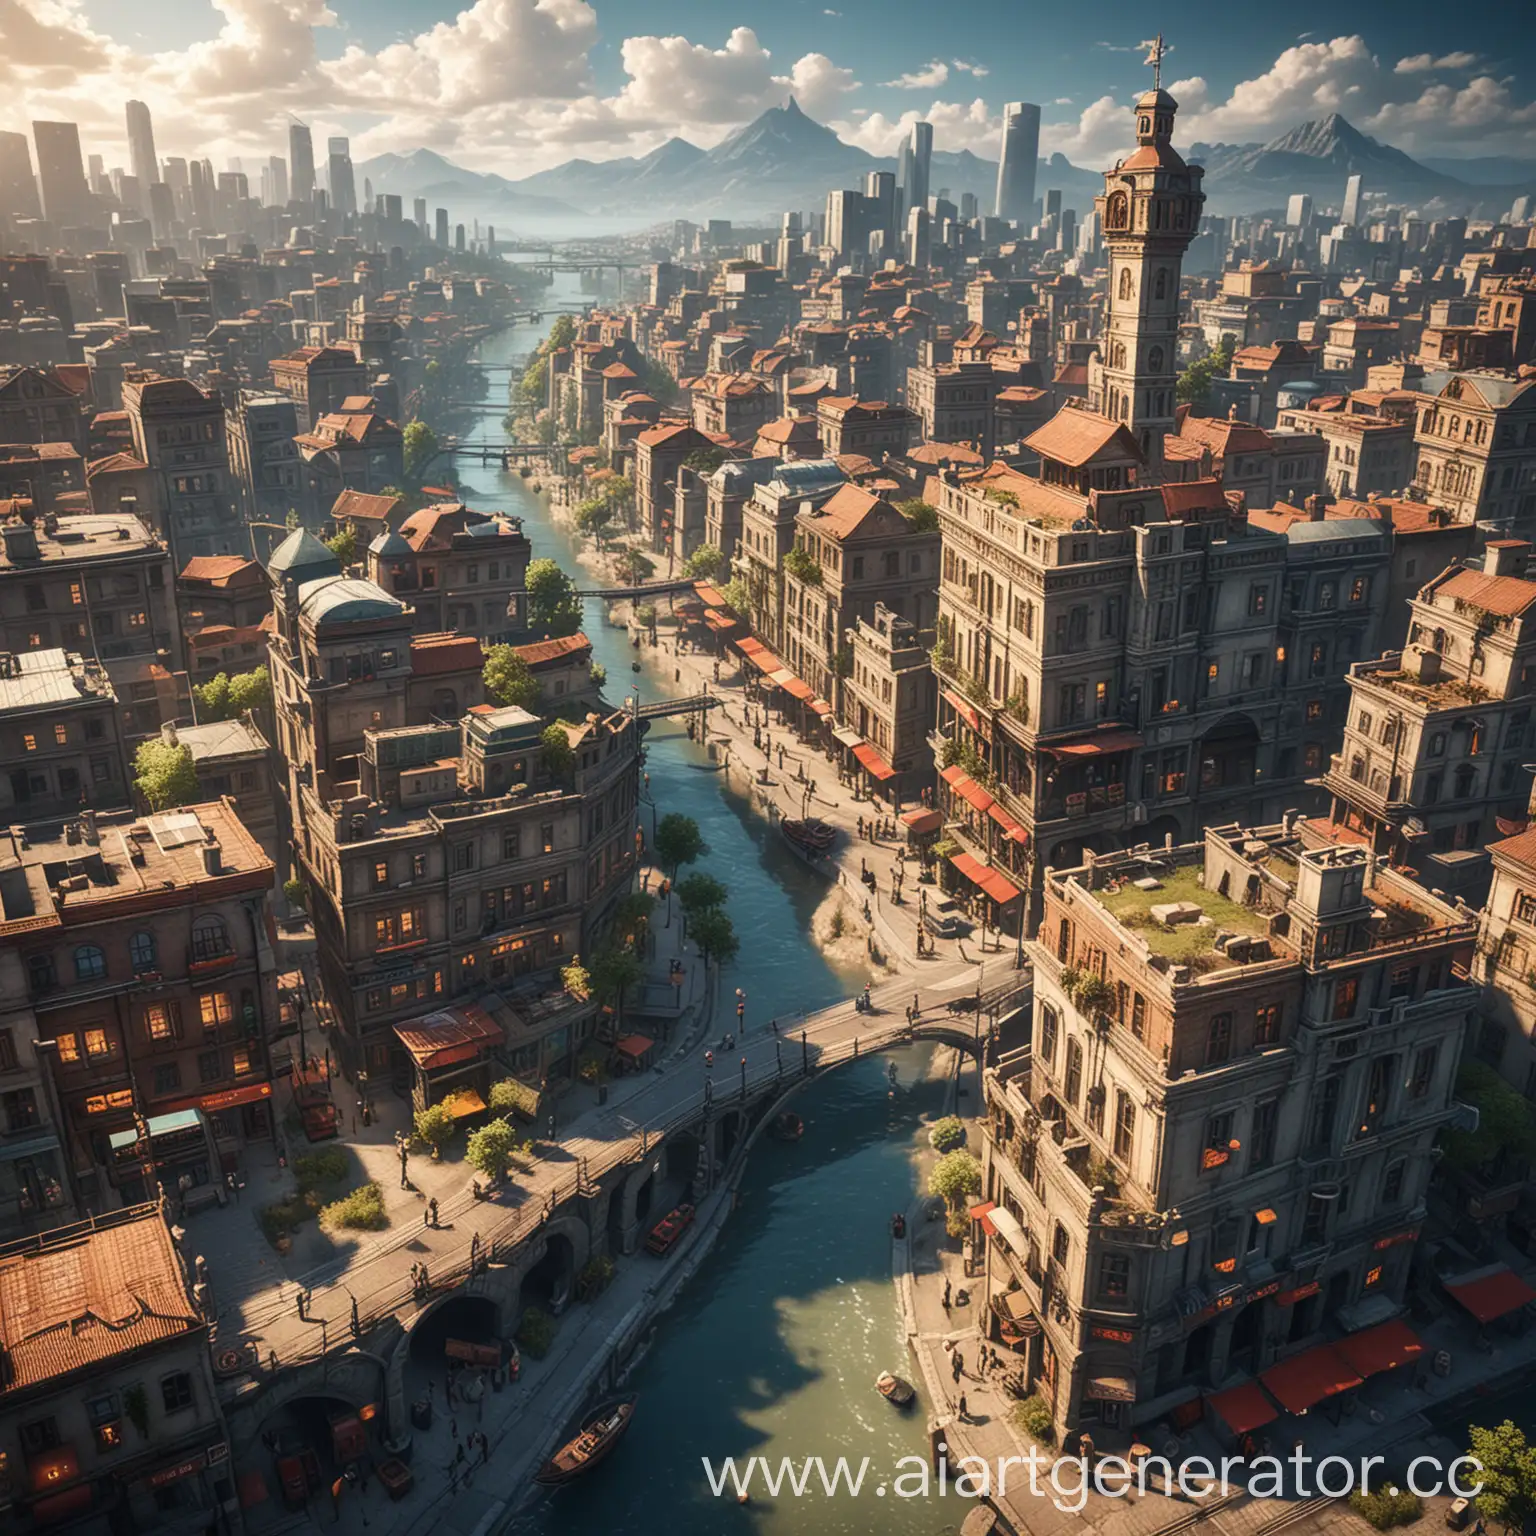 Detailed-HighQuality-Cityscape-in-a-Beautiful-Gaming-World